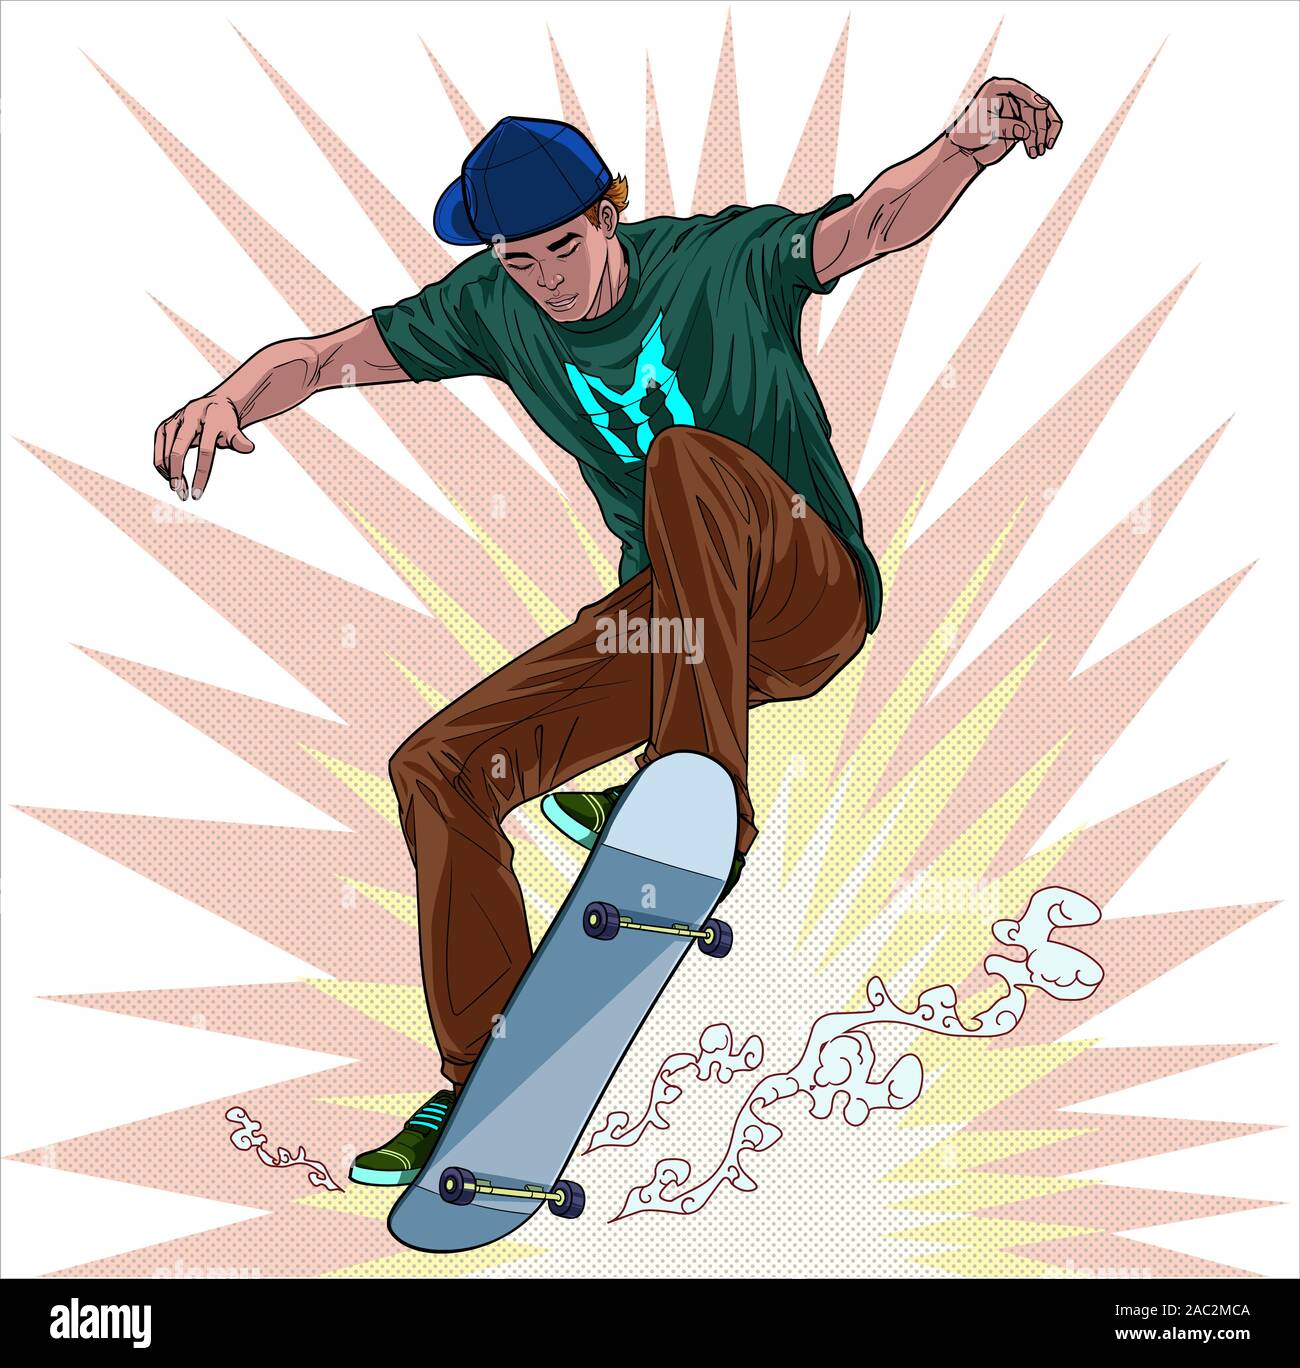 Skateboard Mng Comics S00 - Art of Living - Sports and Lifestyle